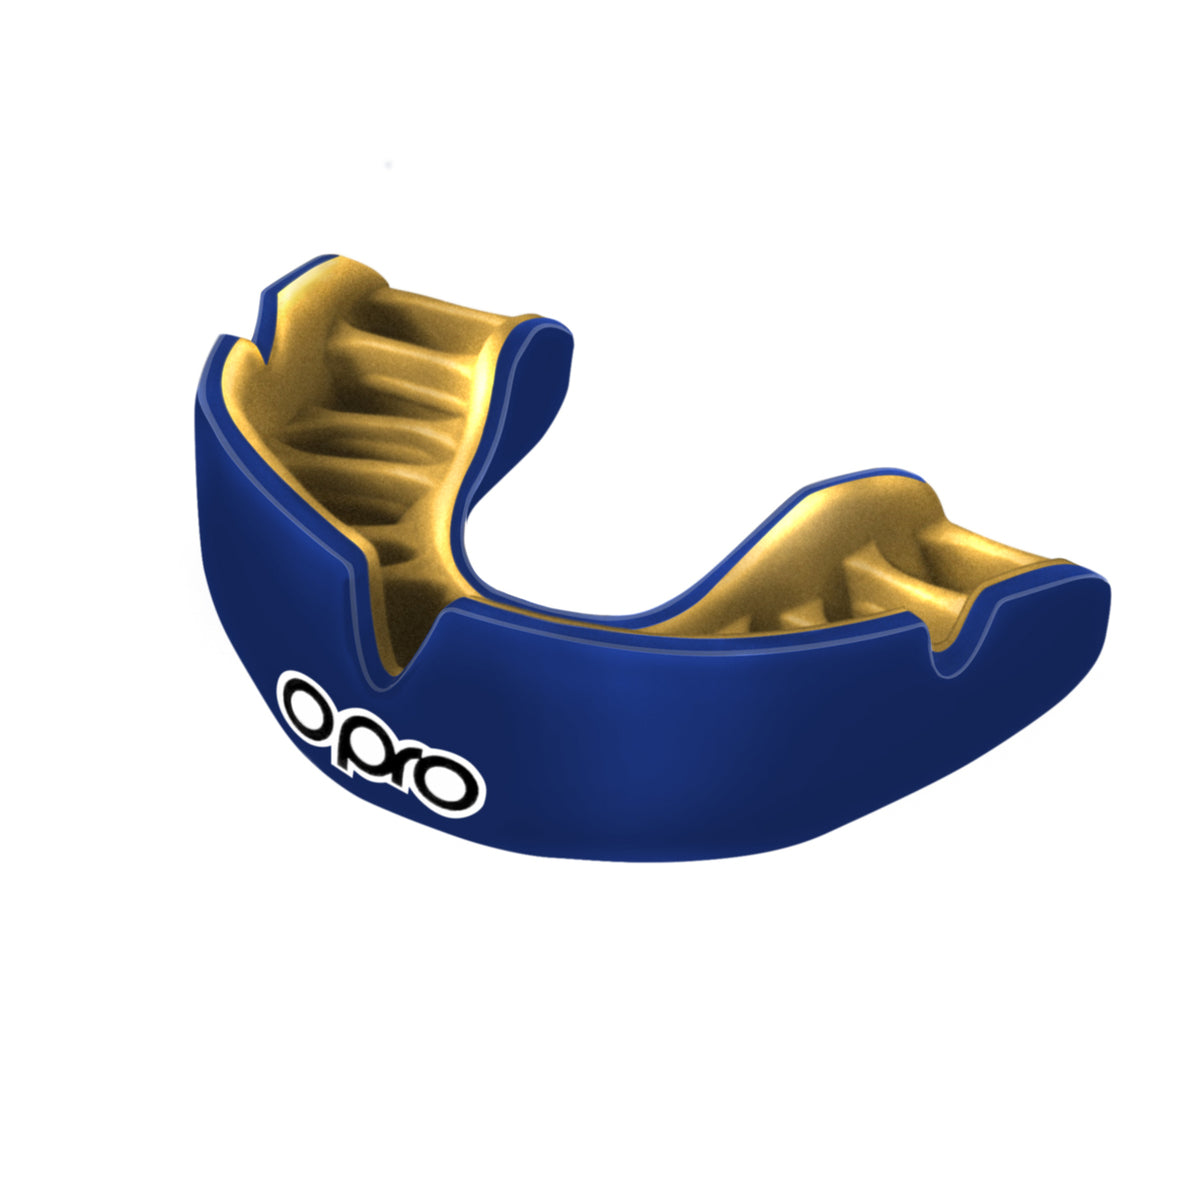 Opro Power Fit Mouth Guard Blue/Gold